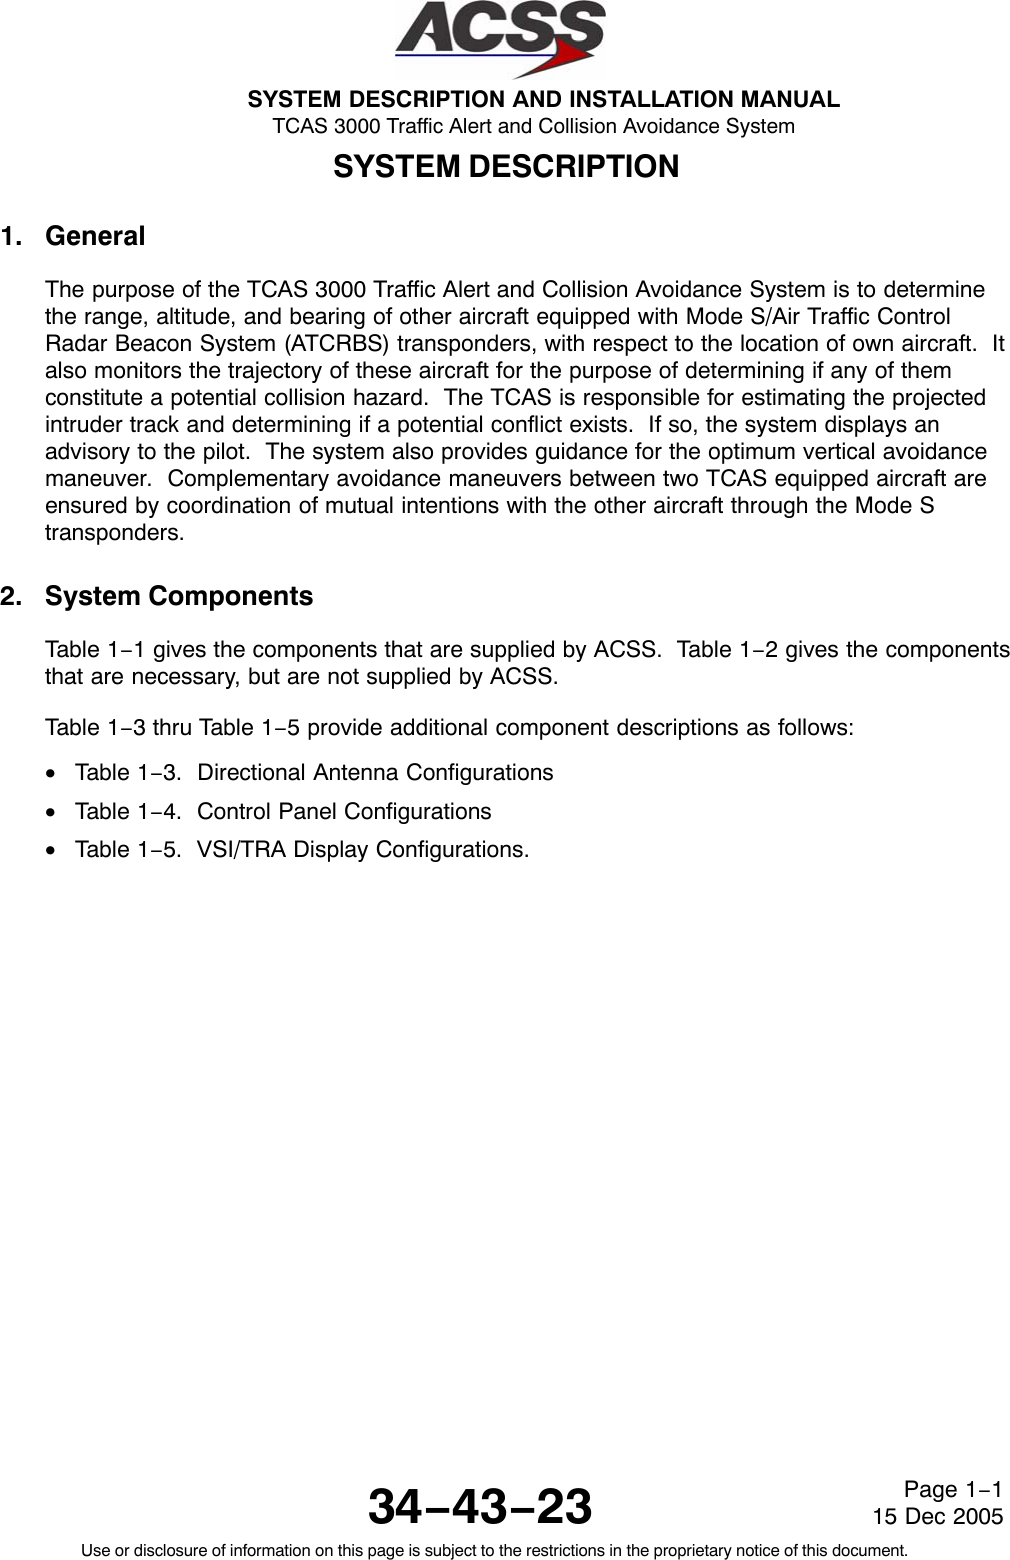 SYSTEM DESCRIPTION AND INSTALLATION MANUAL TCAS 3000 Traffic Alert and Collision Avoidance System34−43−23Use or disclosure of information on this page is subject to the restrictions in the proprietary notice of this document.Page 1−115 Dec 2005SYSTEM DESCRIPTION1. GeneralThe purpose of the TCAS 3000 Traffic Alert and Collision Avoidance System is to determinethe range, altitude, and bearing of other aircraft equipped with Mode S/Air Traffic ControlRadar Beacon System (ATCRBS) transponders, with respect to the location of own aircraft.  Italso monitors the trajectory of these aircraft for the purpose of determining if any of themconstitute a potential collision hazard.  The TCAS is responsible for estimating the projectedintruder track and determining if a potential conflict exists.  If so, the system displays anadvisory to the pilot.  The system also provides guidance for the optimum vertical avoidancemaneuver.  Complementary avoidance maneuvers between two TCAS equipped aircraft areensured by coordination of mutual intentions with the other aircraft through the Mode Stransponders.2. System ComponentsTable 1−1 gives the components that are supplied by ACSS.  Table 1−2 gives the componentsthat are necessary, but are not supplied by ACSS.Table 1−3 thru Table 1−5 provide additional component descriptions as follows:•Table 1−3.  Directional Antenna Configurations•Table 1−4.  Control Panel Configurations•Table 1−5.  VSI/TRA Display Configurations.